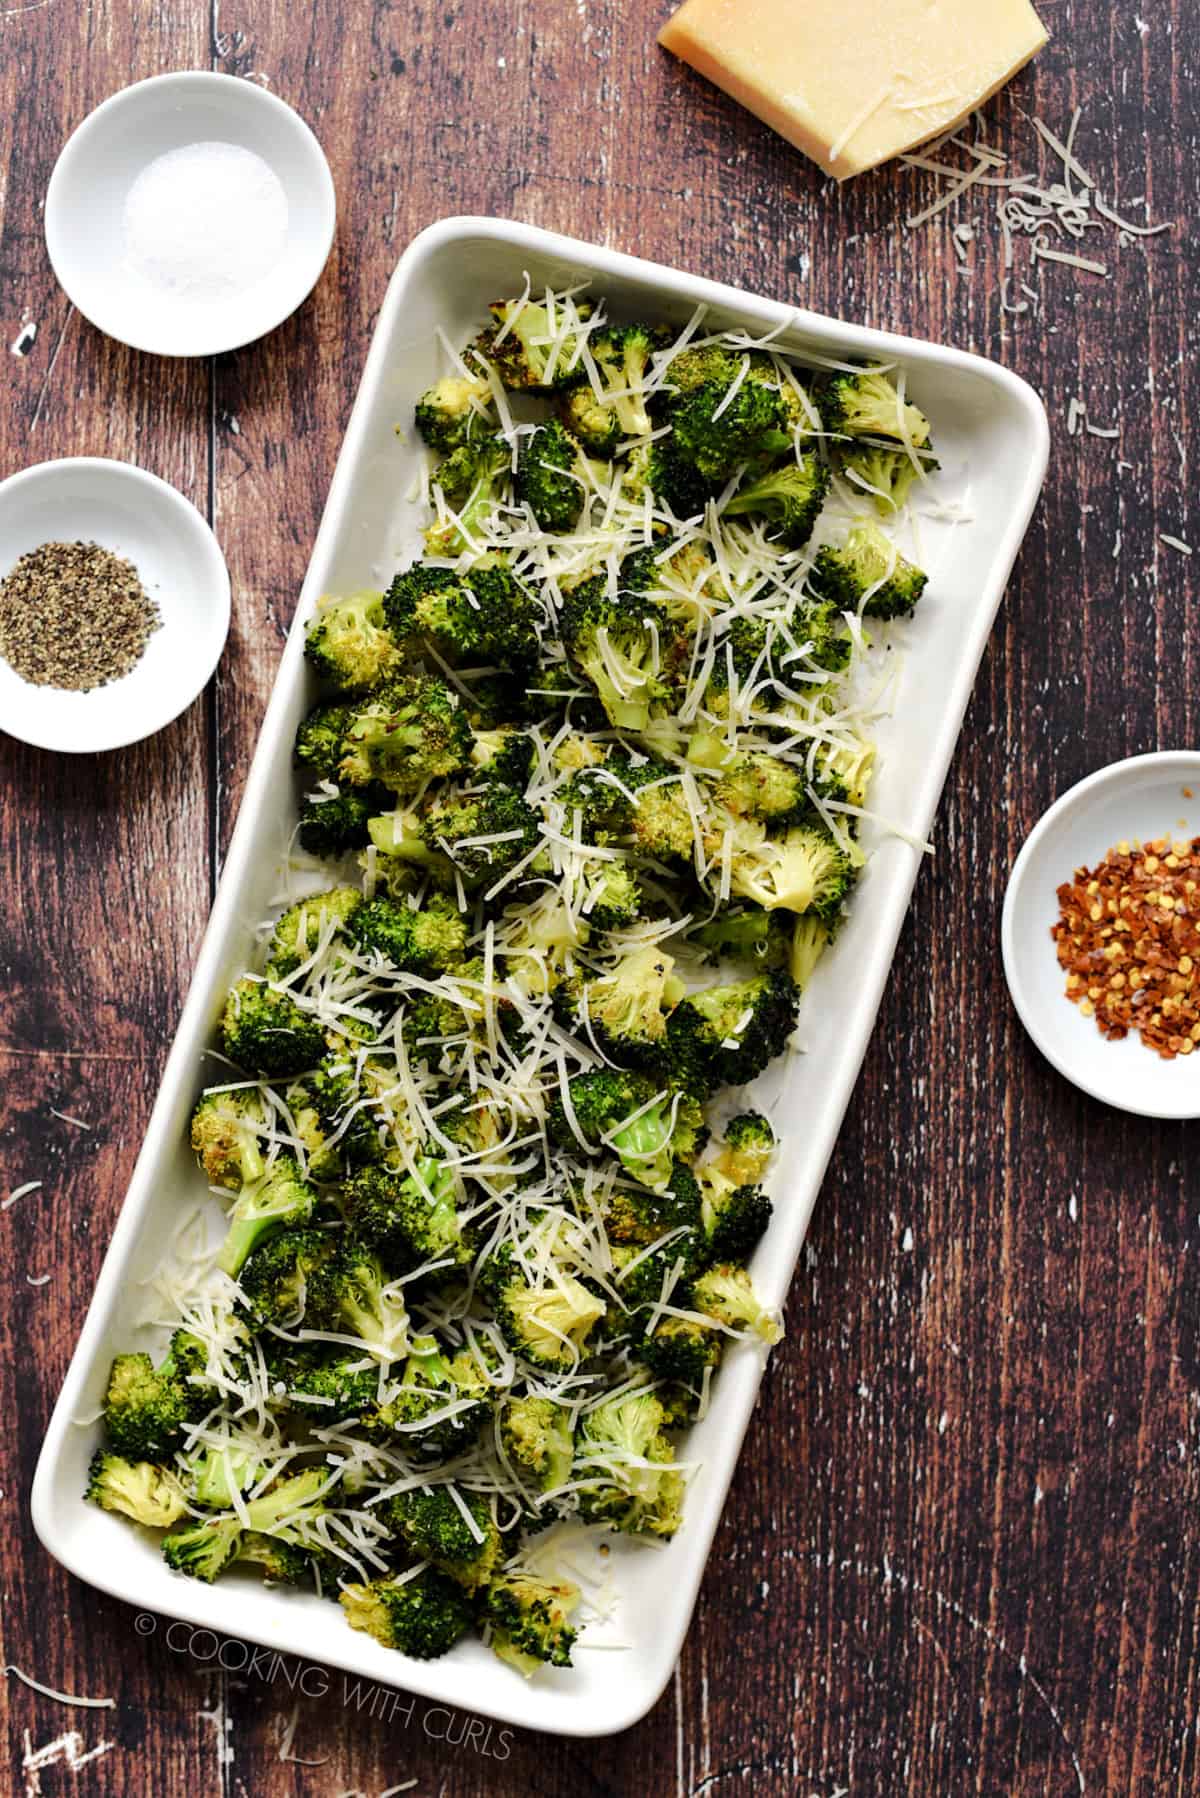 Looking down on Parmesan topped Oven Roasted Broccoli on a rectangle platter.